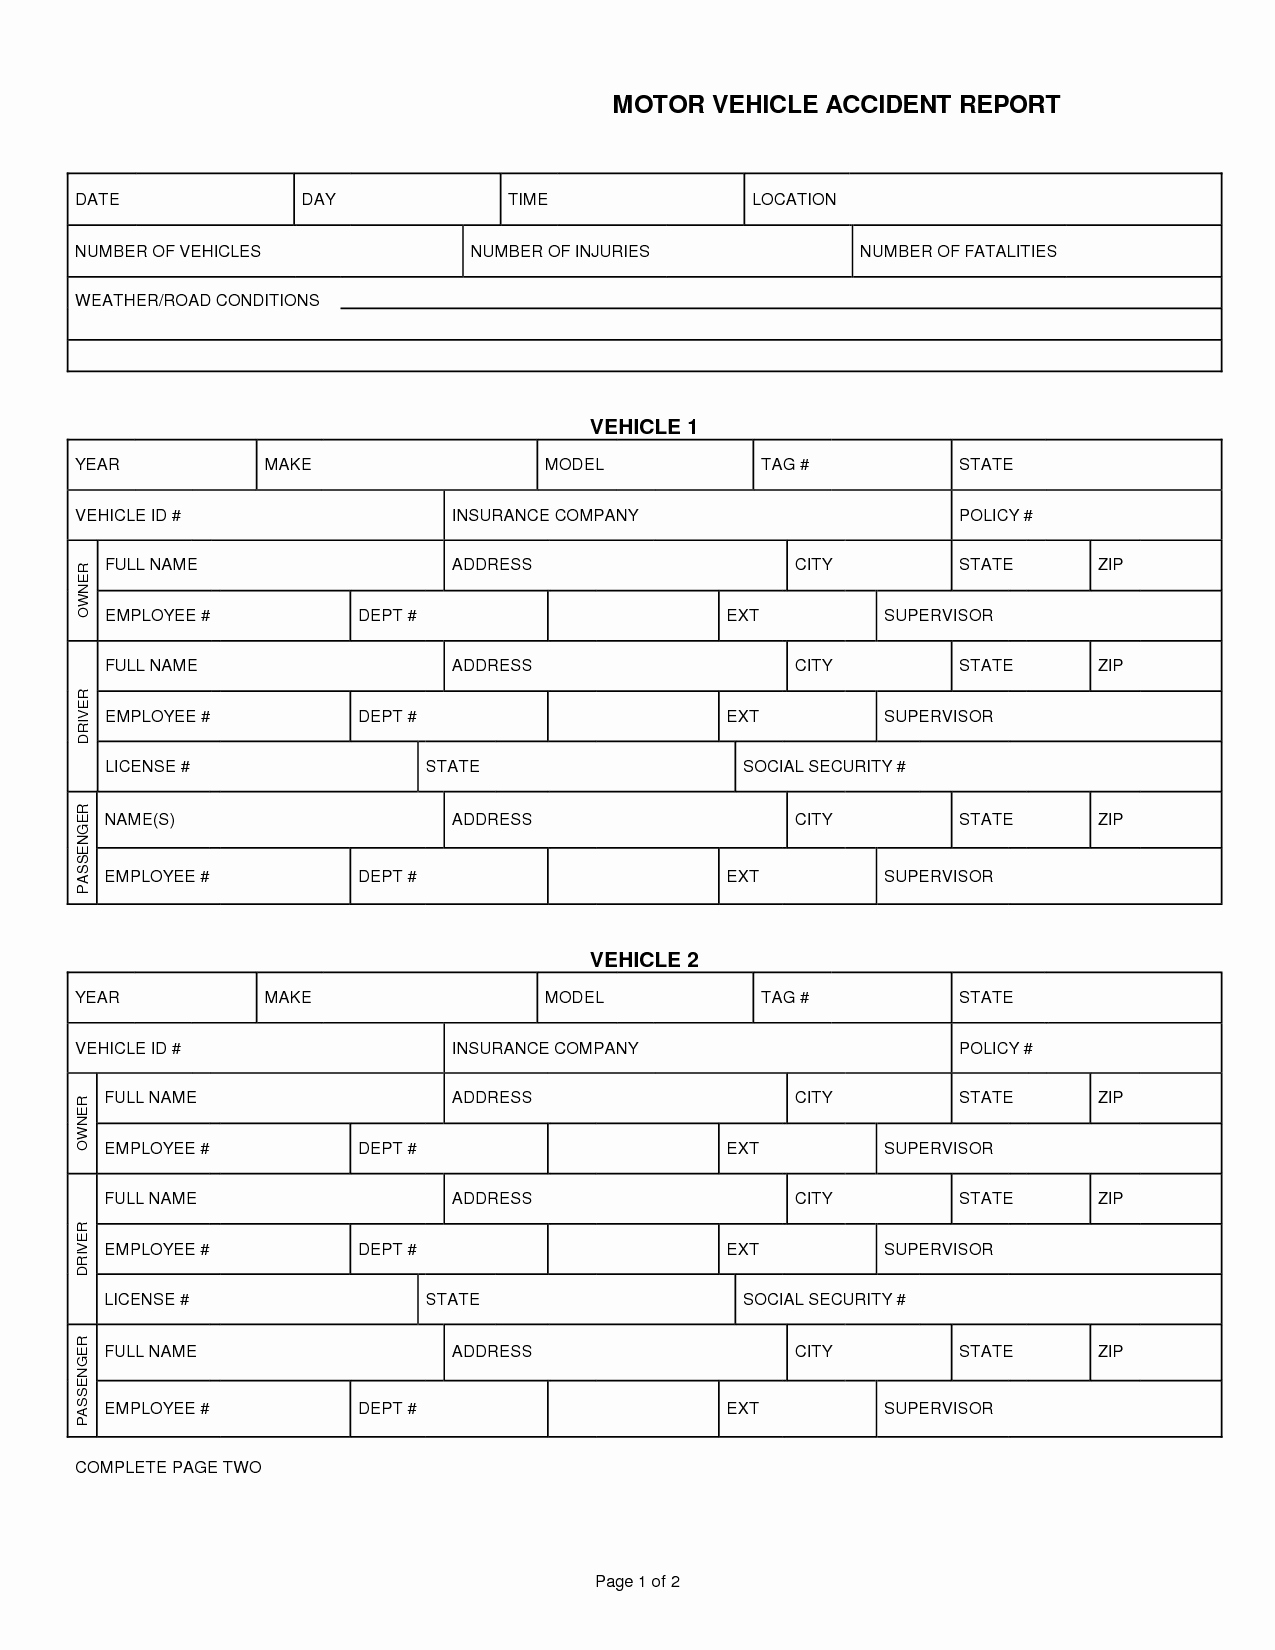 Accident Reporting form Template Inspirational Tario Motor Vehicle Accident Report Impremedia